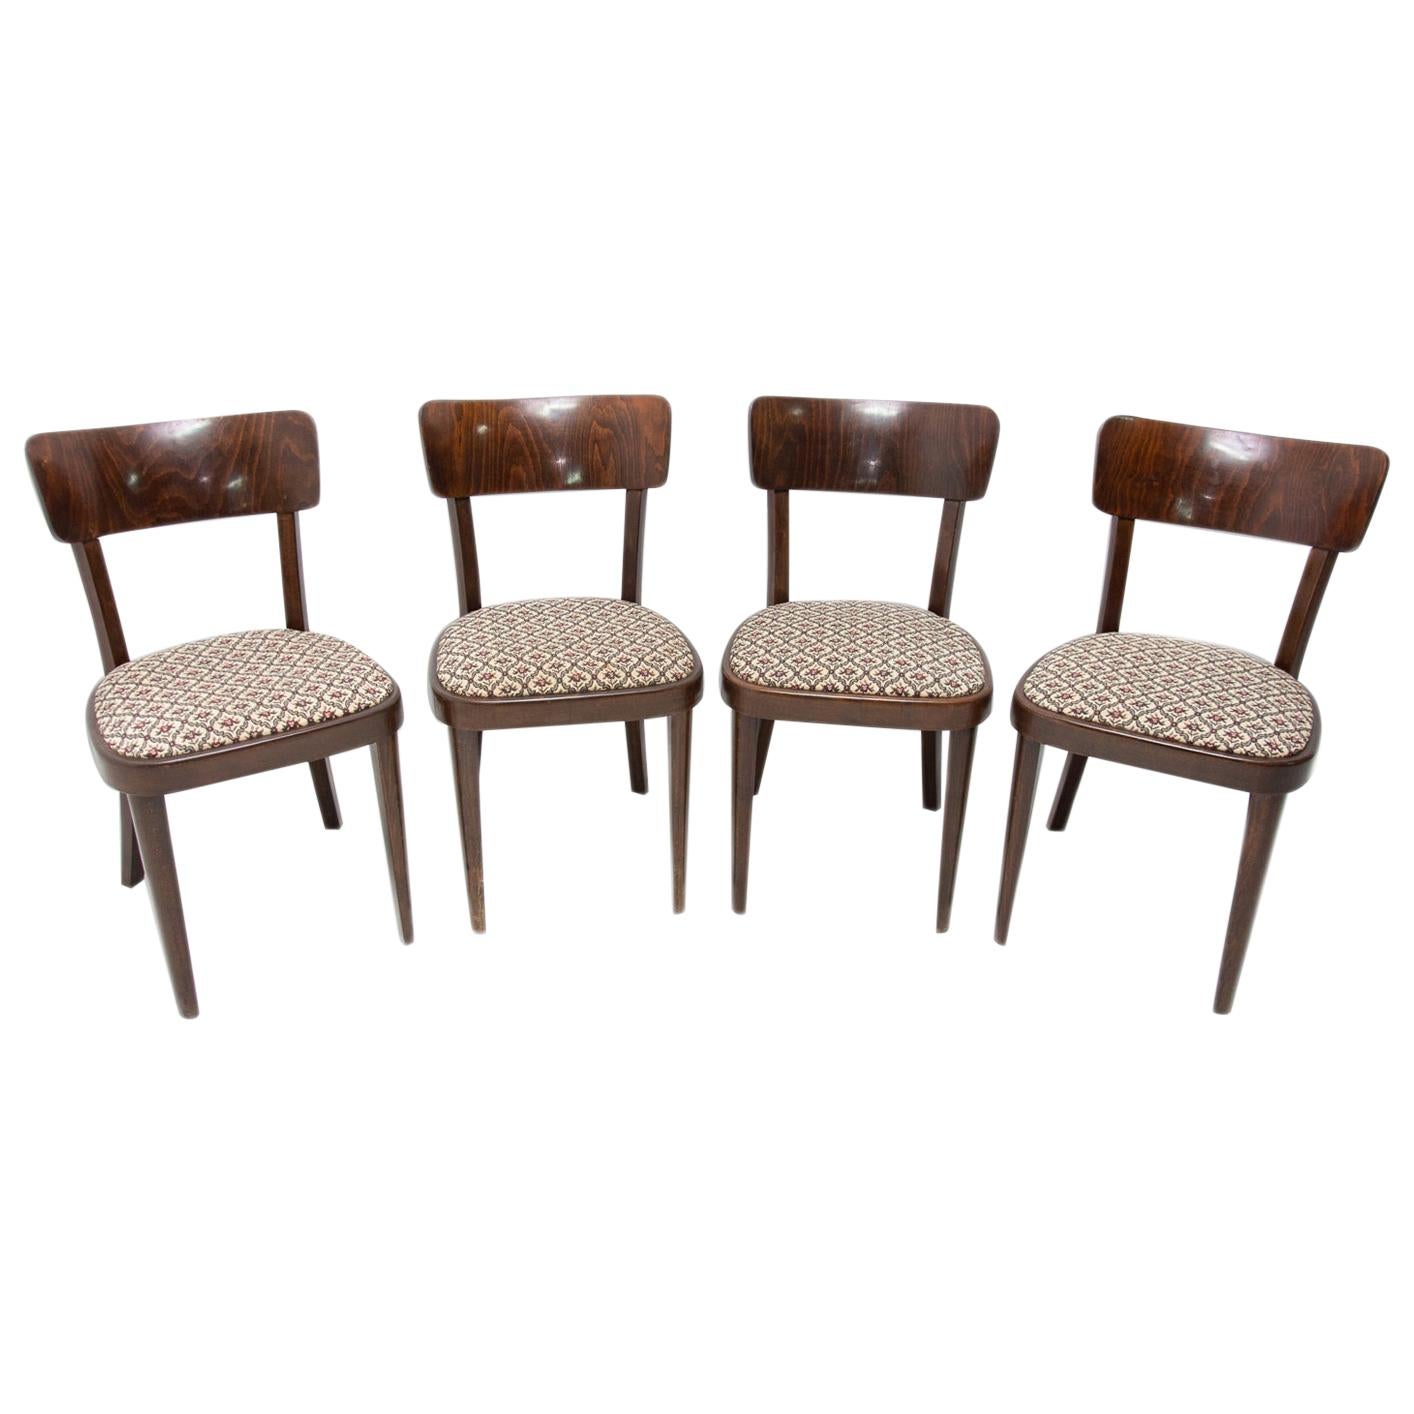 Set of Four Thonet Dining Chairs, Czechoslovakia, 1950s